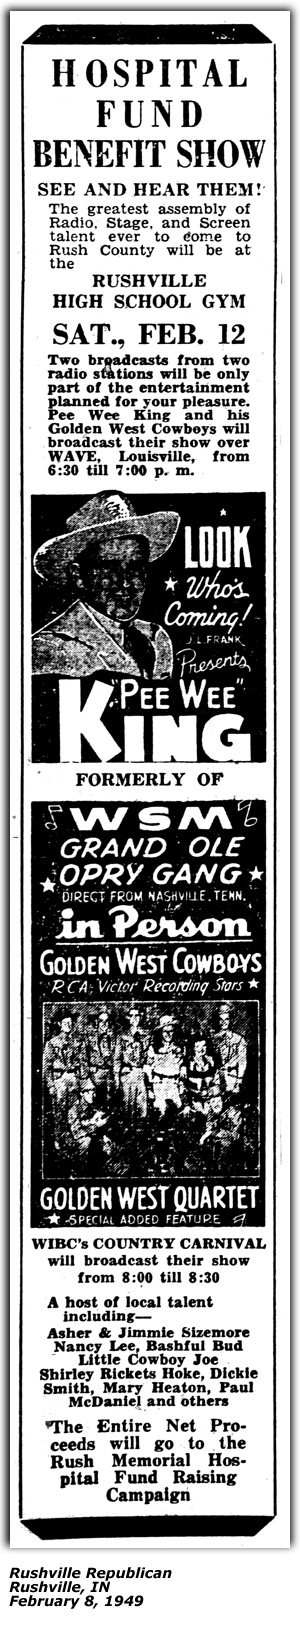 Promo Ad - Hospital Fund Benefit Show - Rushville, IN - Pee Wee King - WIBC Country Carnival - Asher and Jimmie Sizemore - Nancy Louise - Bashful Bud - Little Cowboy Joe - Dickie Smith - Paul McDaniel - February 1949